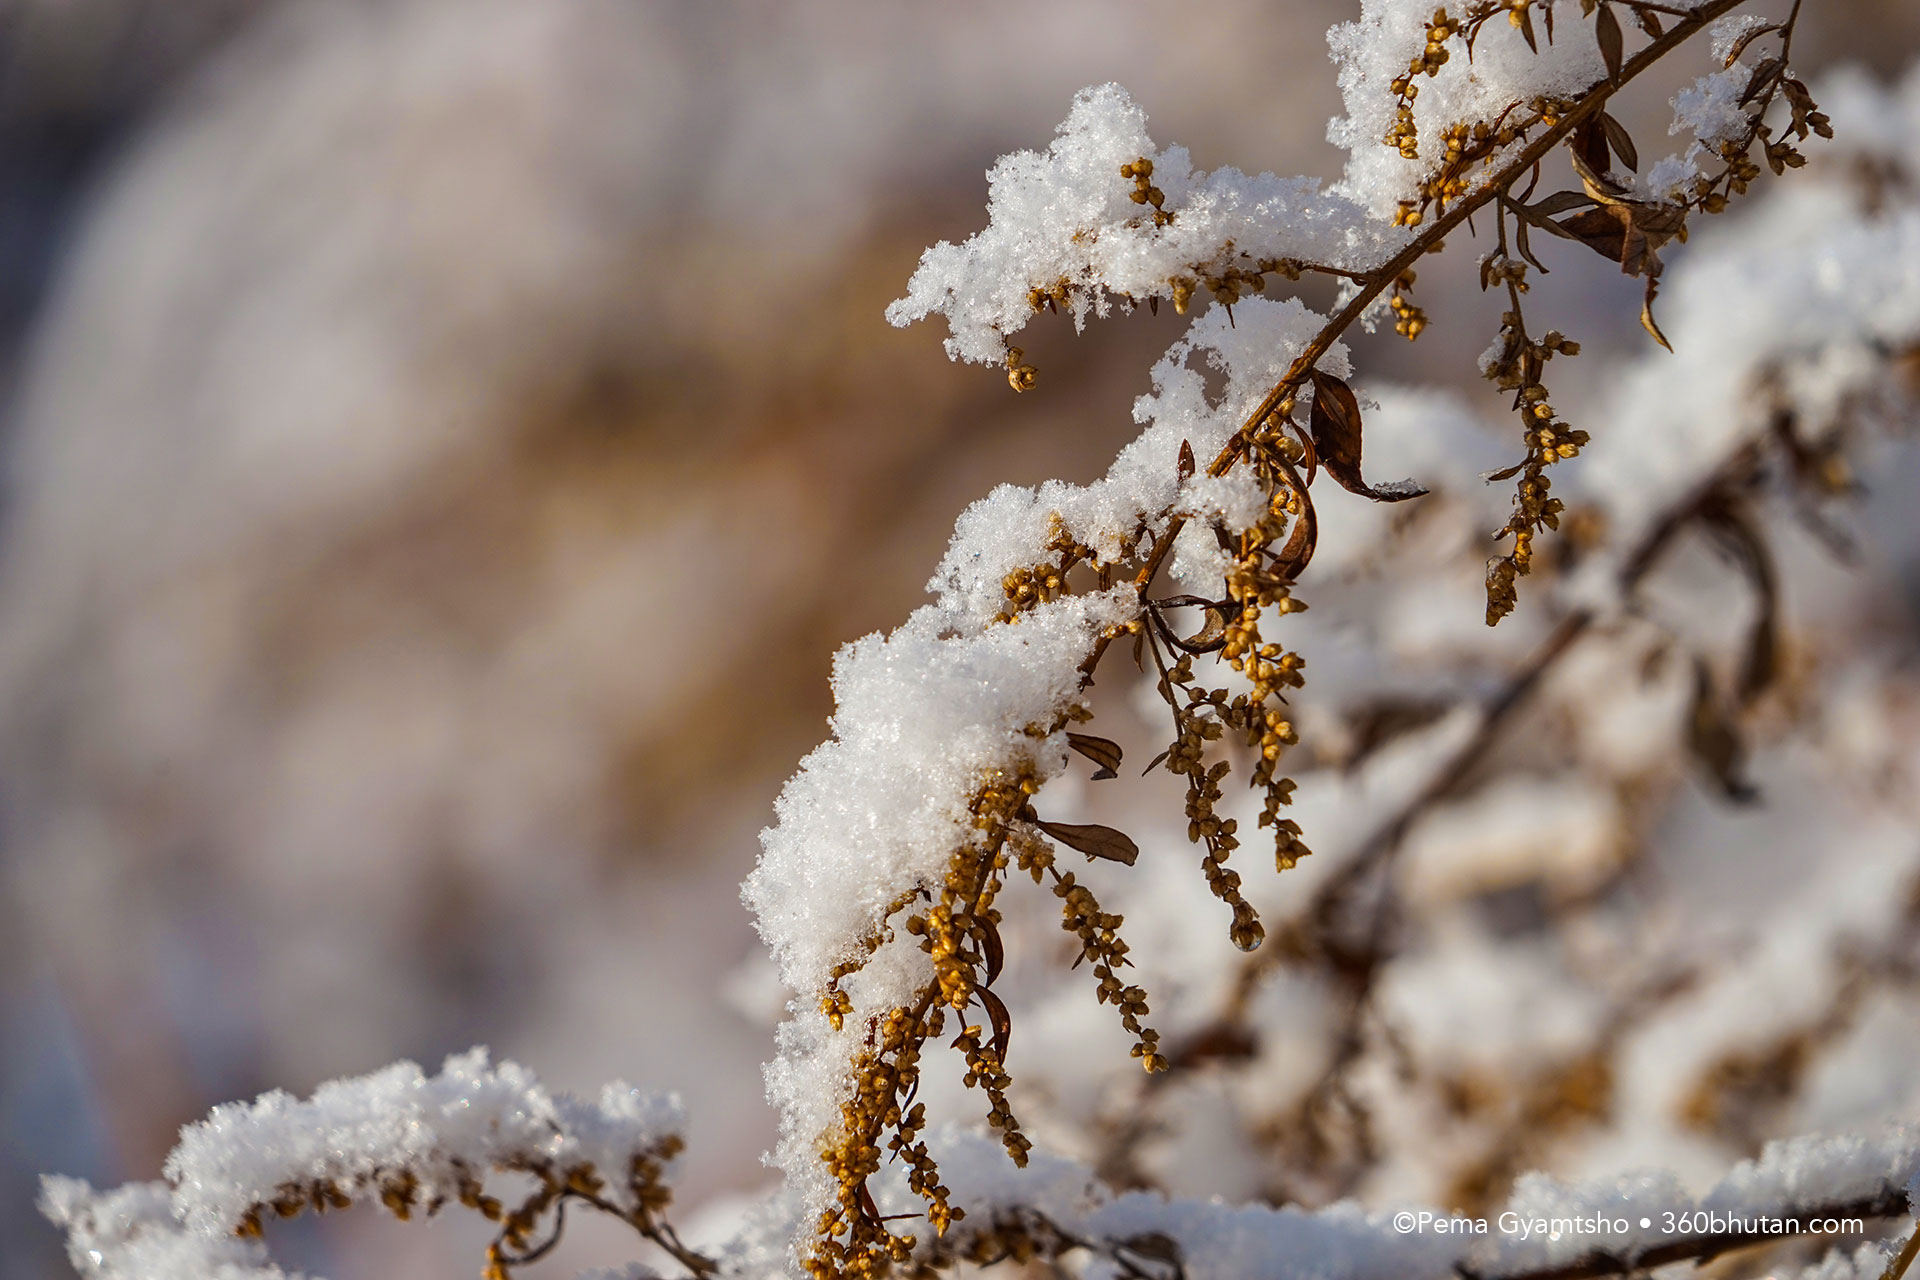 Nature teaches great lesson of interdependence. Dry artemisia plants holds snow on branches.